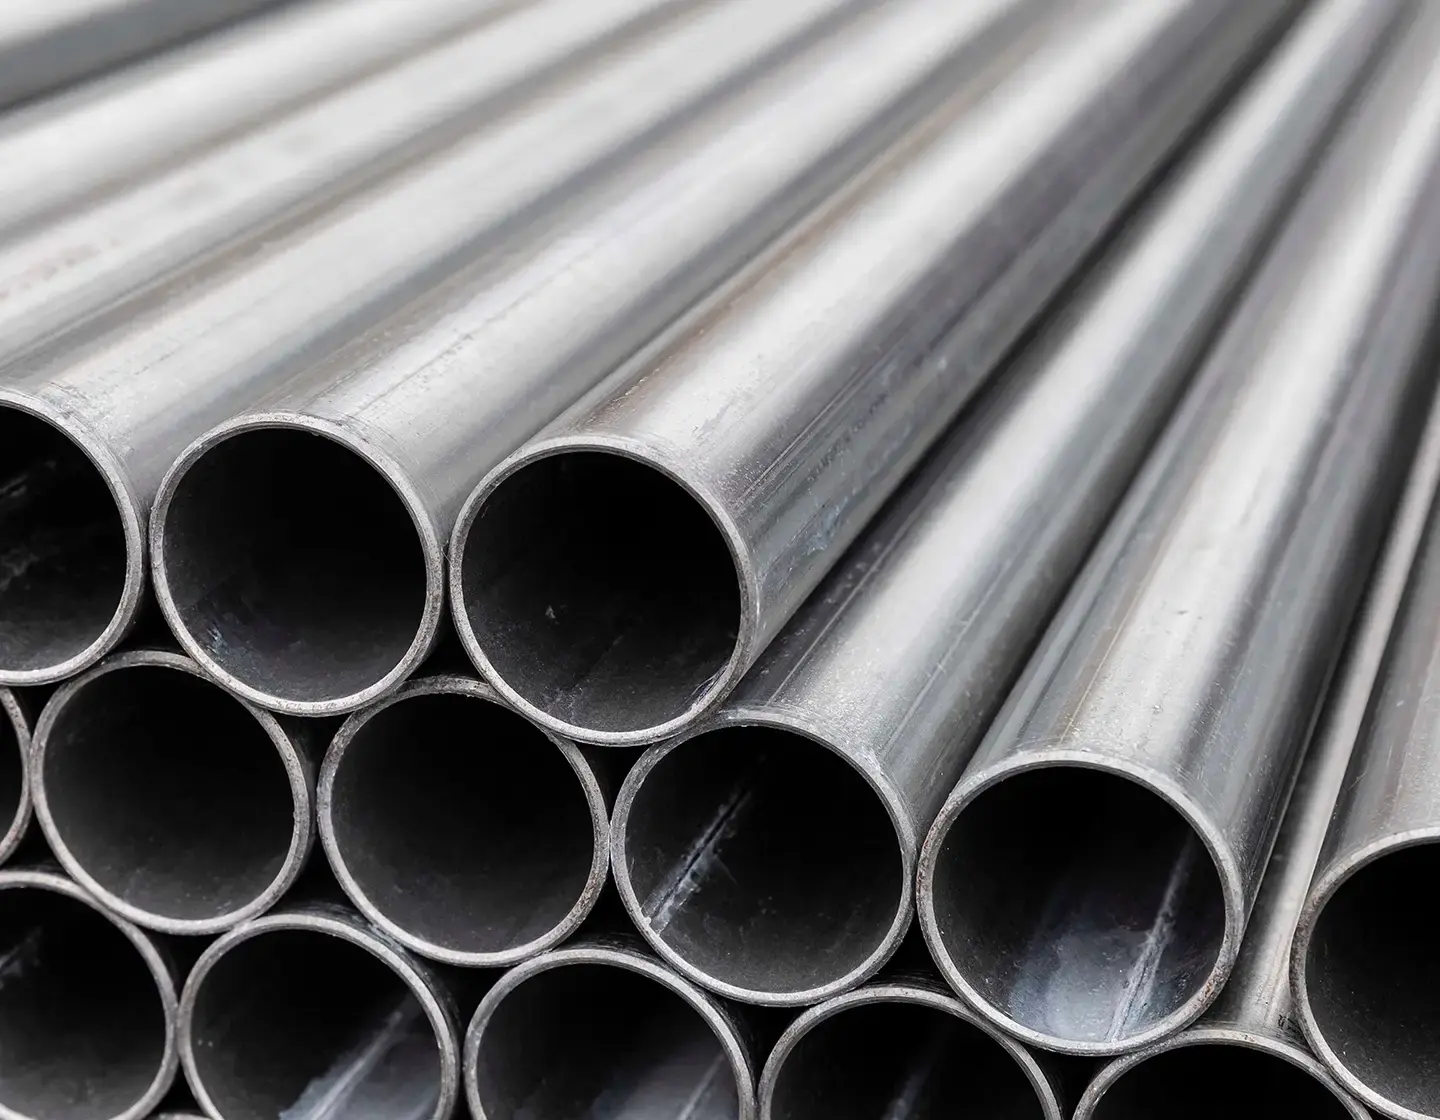 A stack of steel tubes